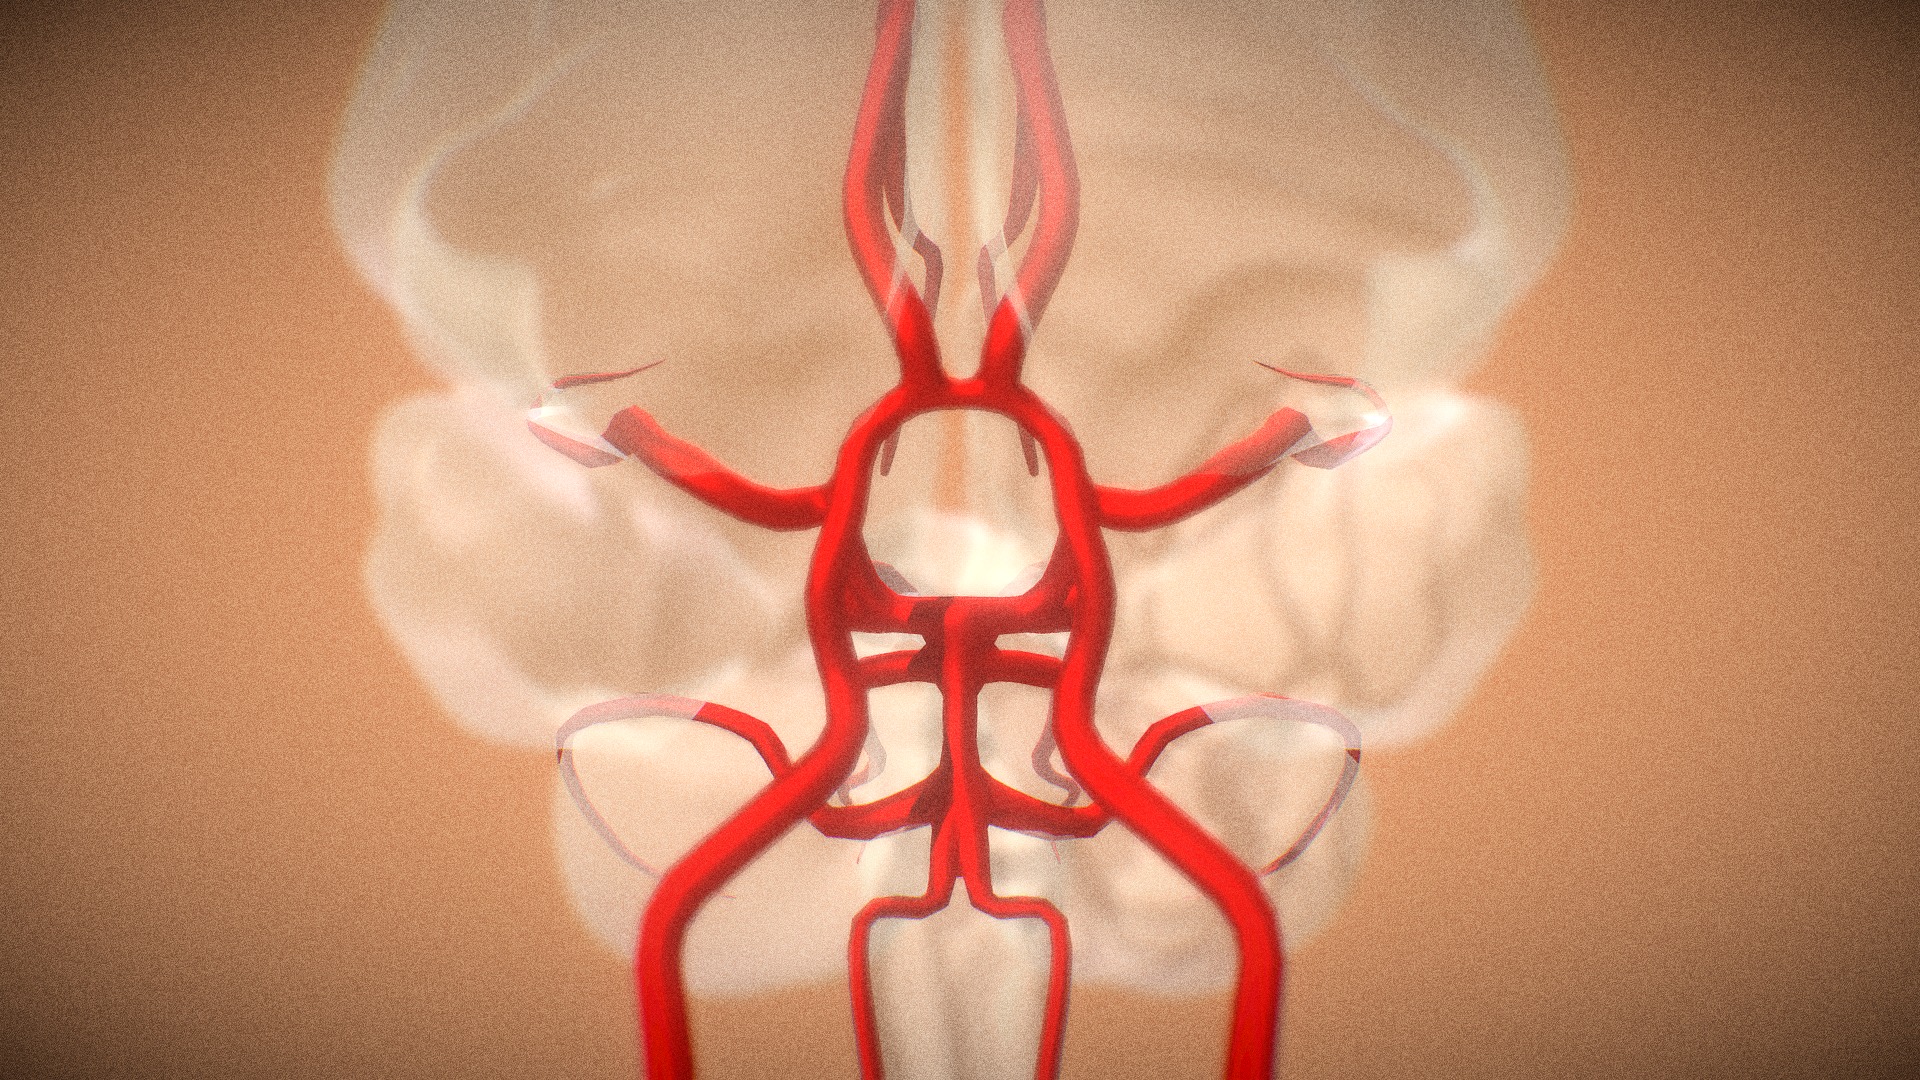 circle-of-willis-arteries-of-brain-animated-buy-royalty-free-3d